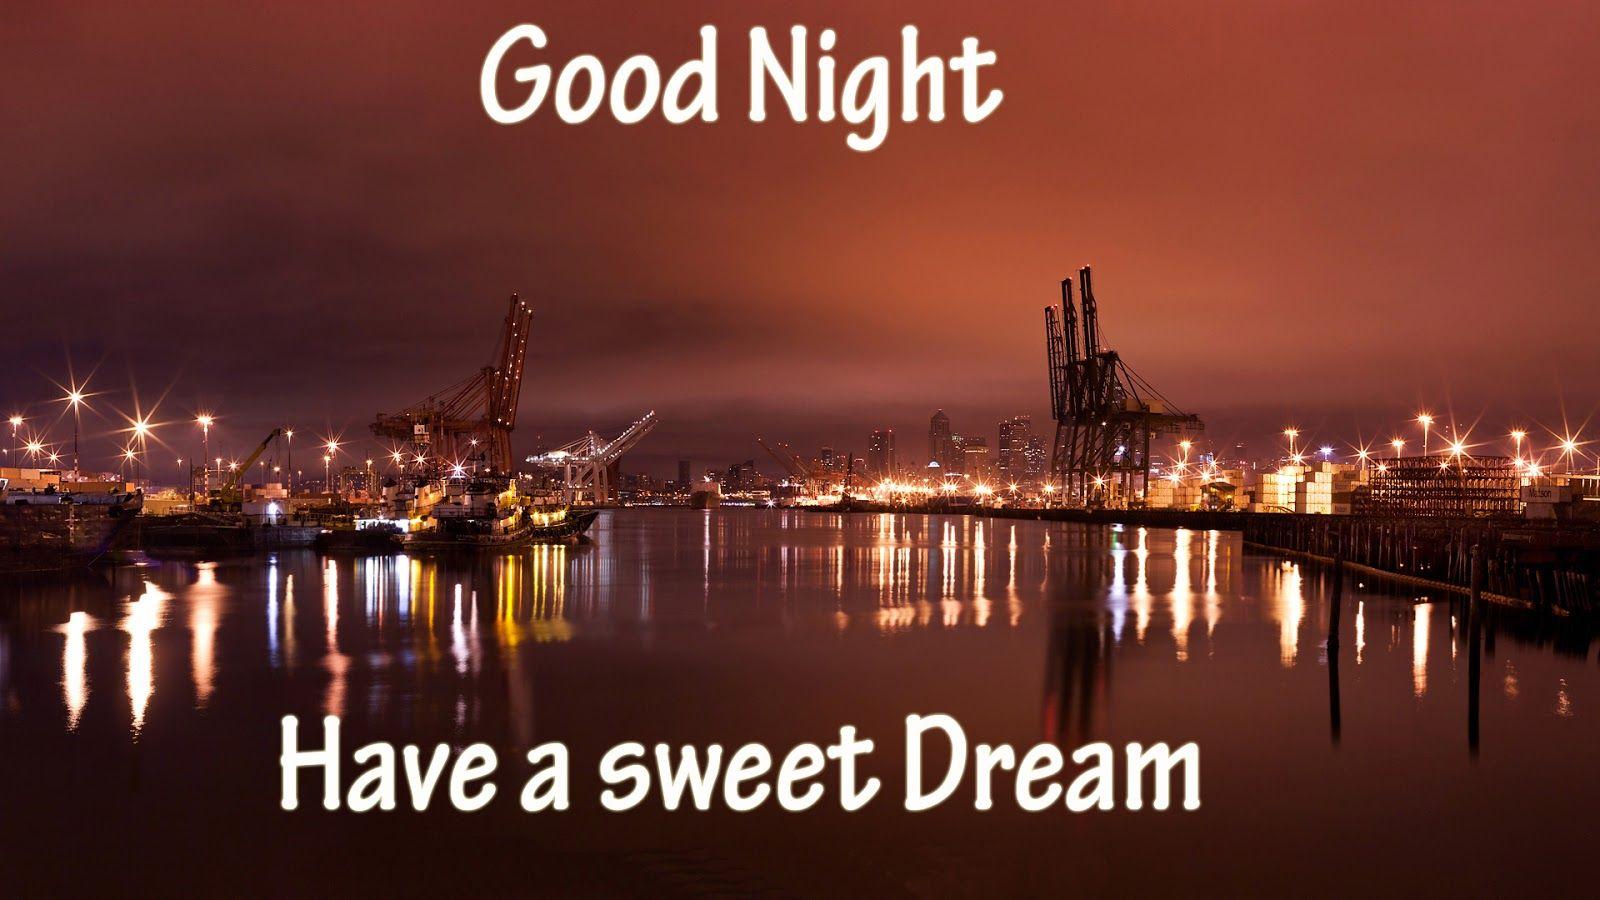 good night greetings quotes wishes HD wallpaper free download